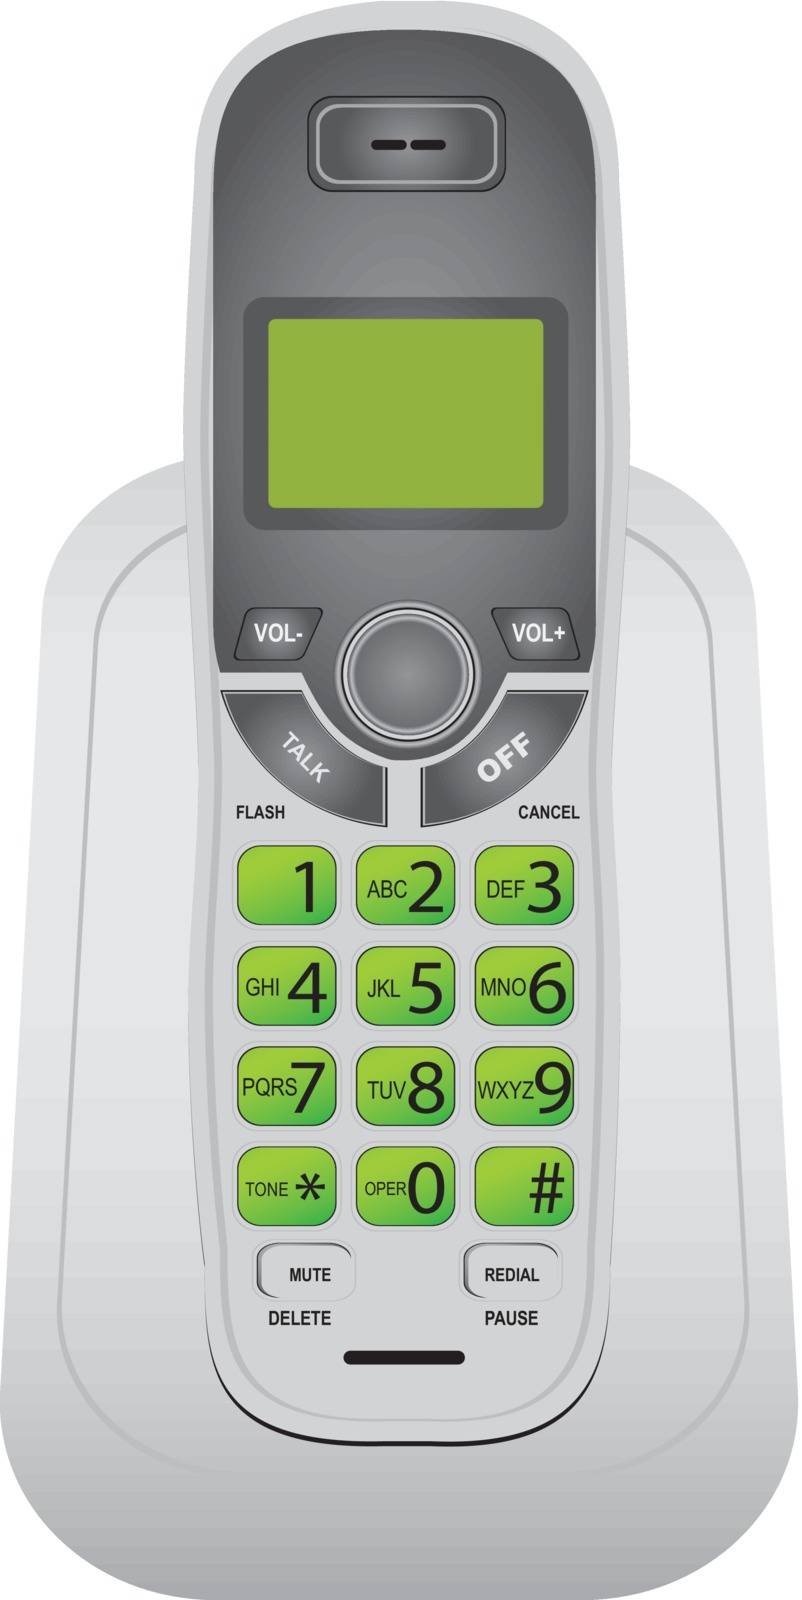 Classic cordless phone for office and home use. Vector illustration.